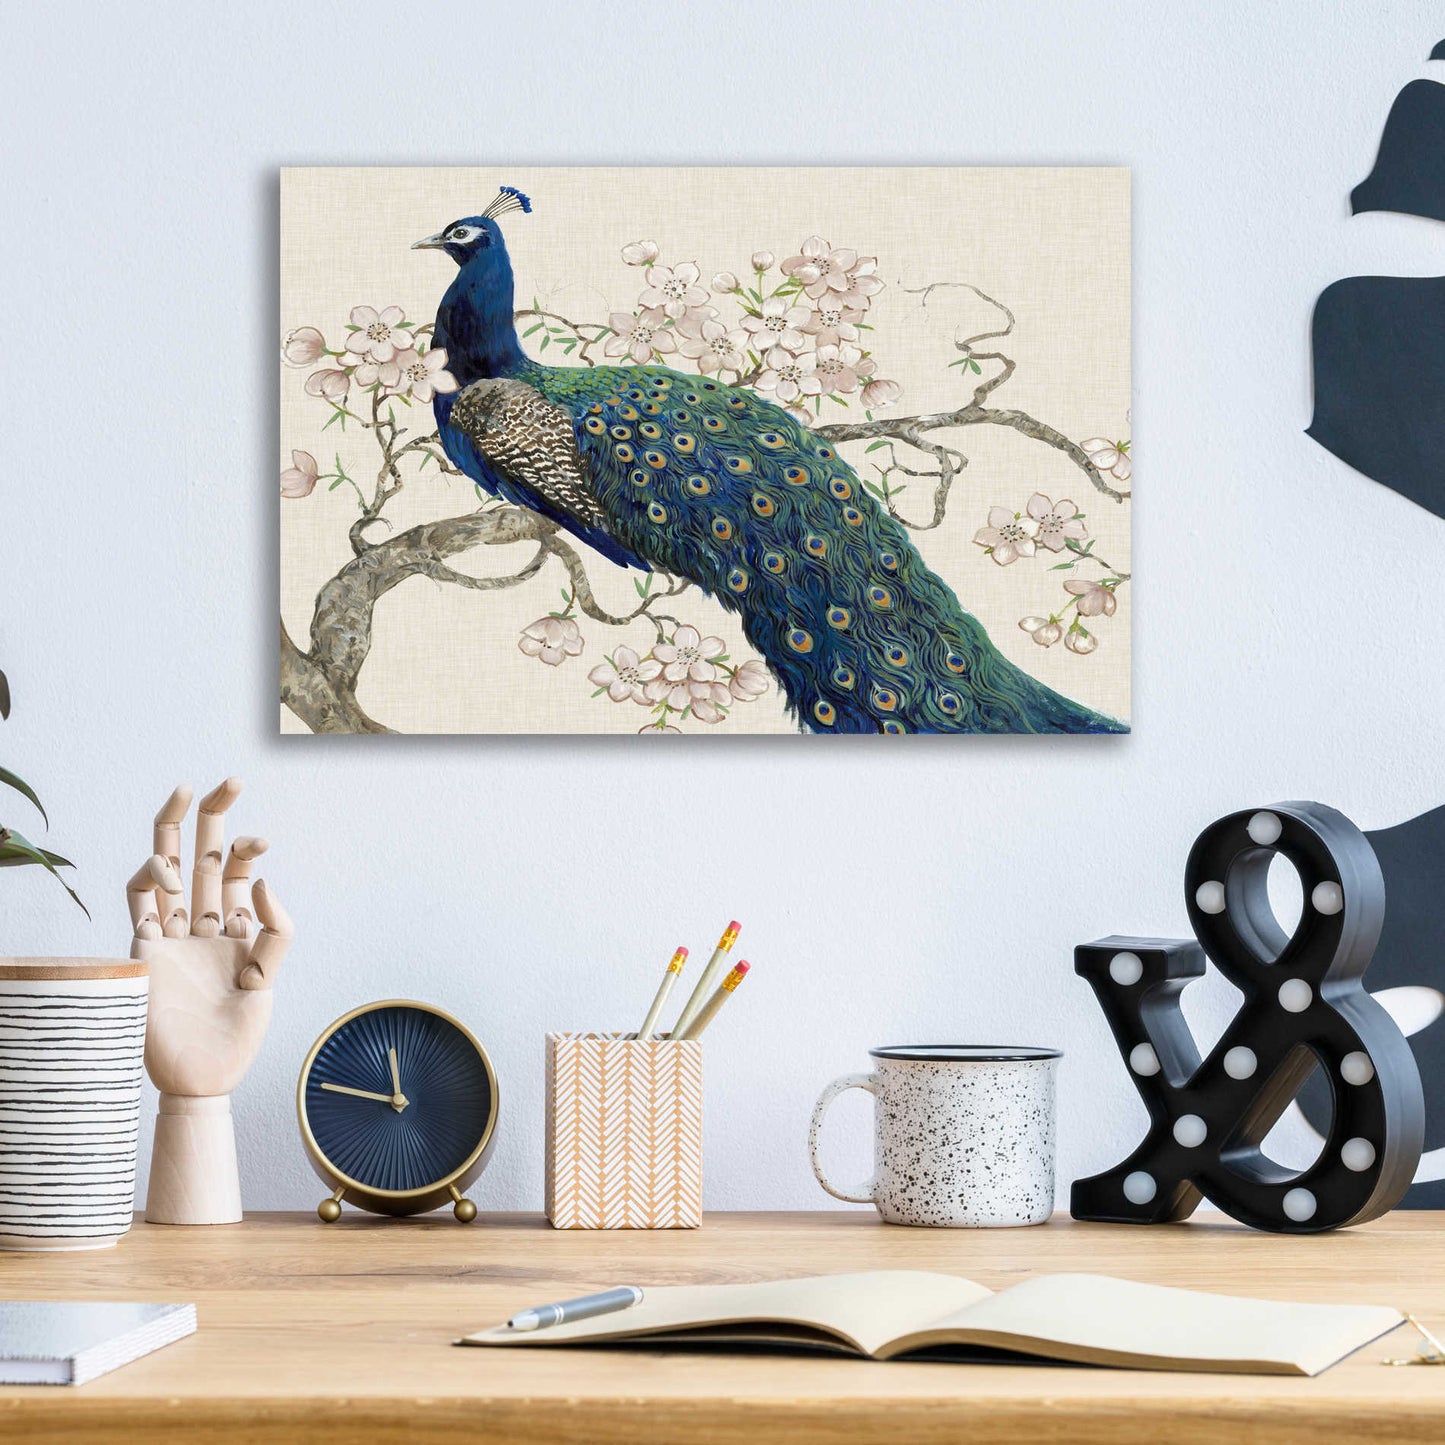 Epic Art 'Peacock & Blossoms II' by Tim O'Toole, Acrylic Glass Wall Art,16x12